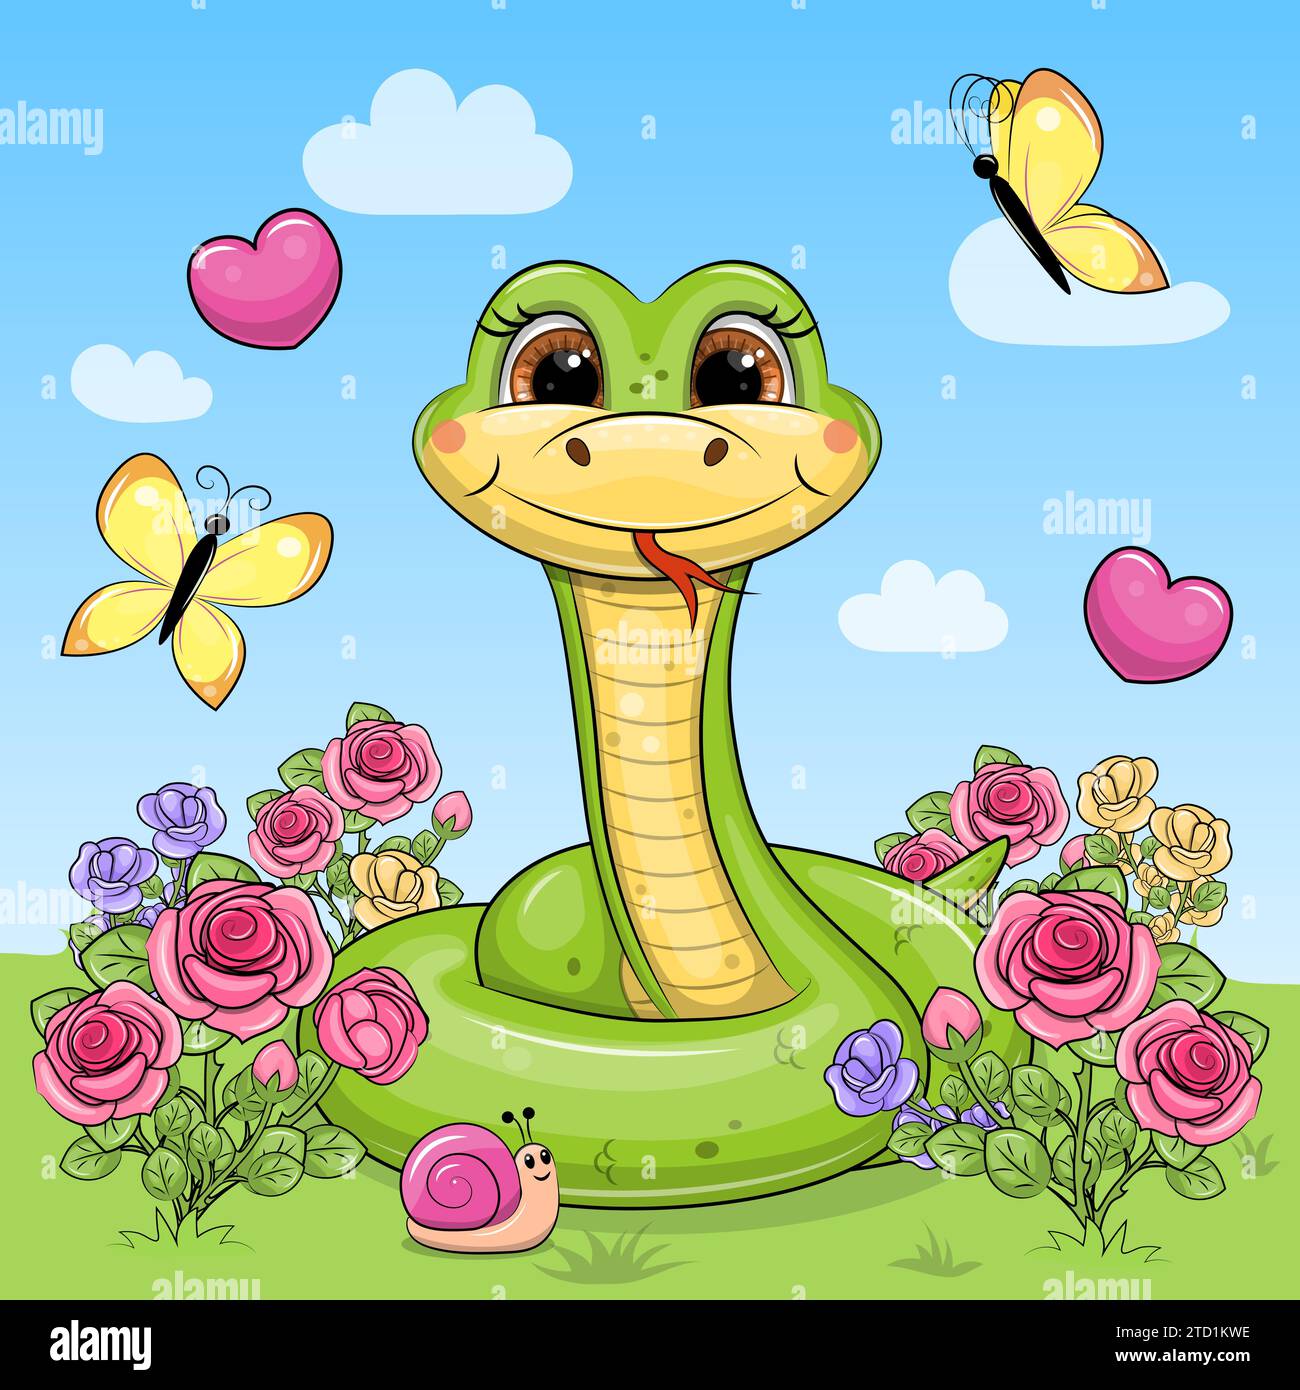 A cute cartoon green snake with a flower wreath and butterflies is sitting in the rose garden. Vector illustration of an animal in nature with flowers Stock Vector